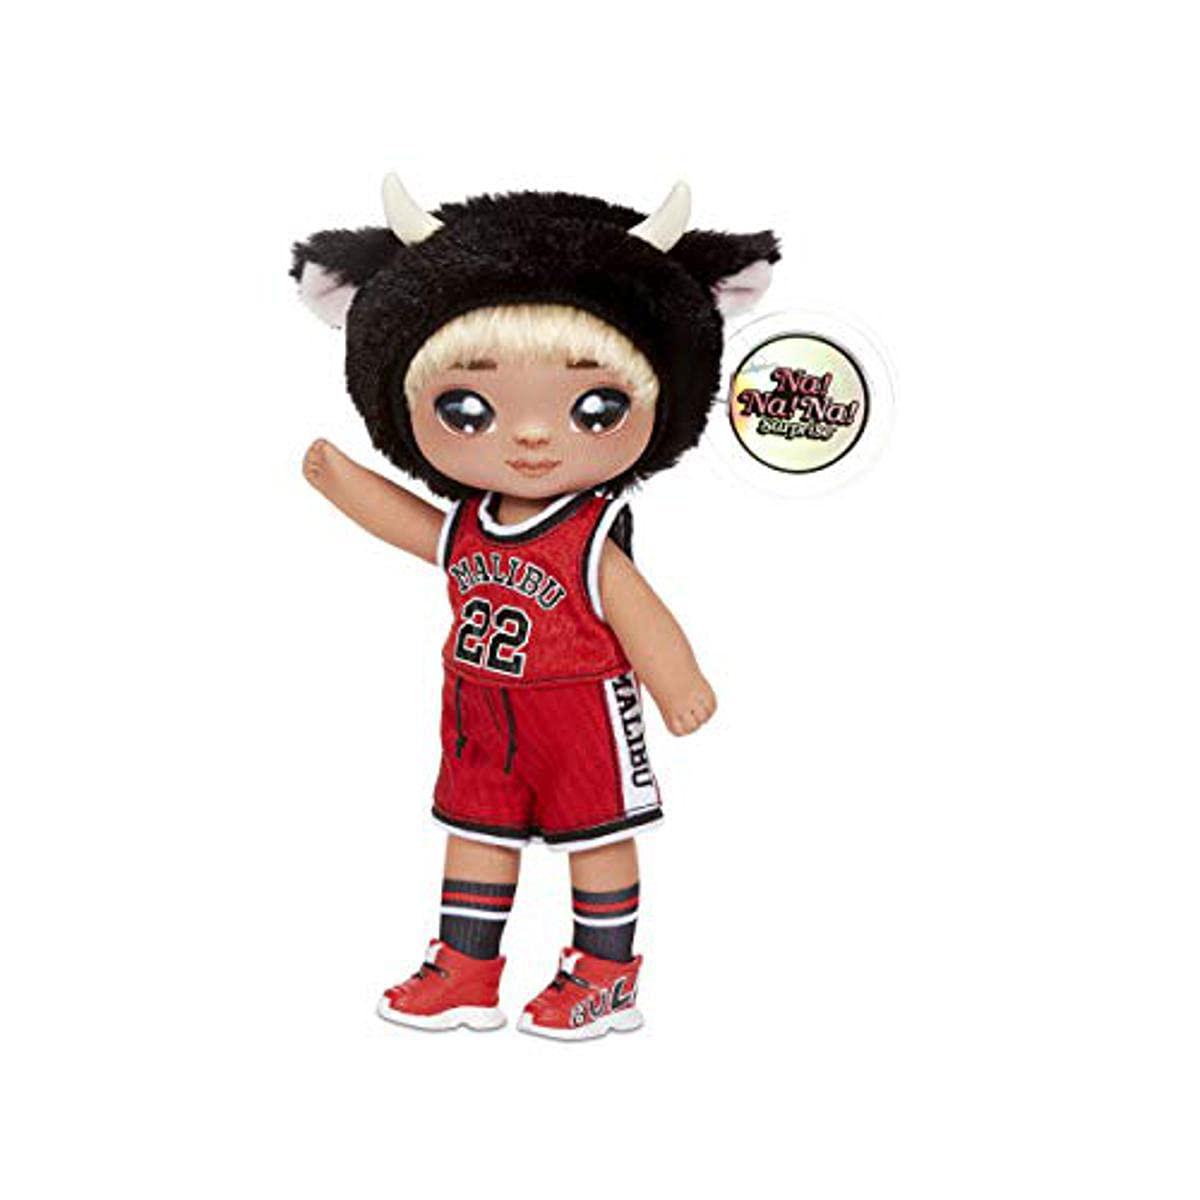 na! na! na! surprise mga entertainment 2 in 1 fashion doll and plush purse series 4, tommy torro